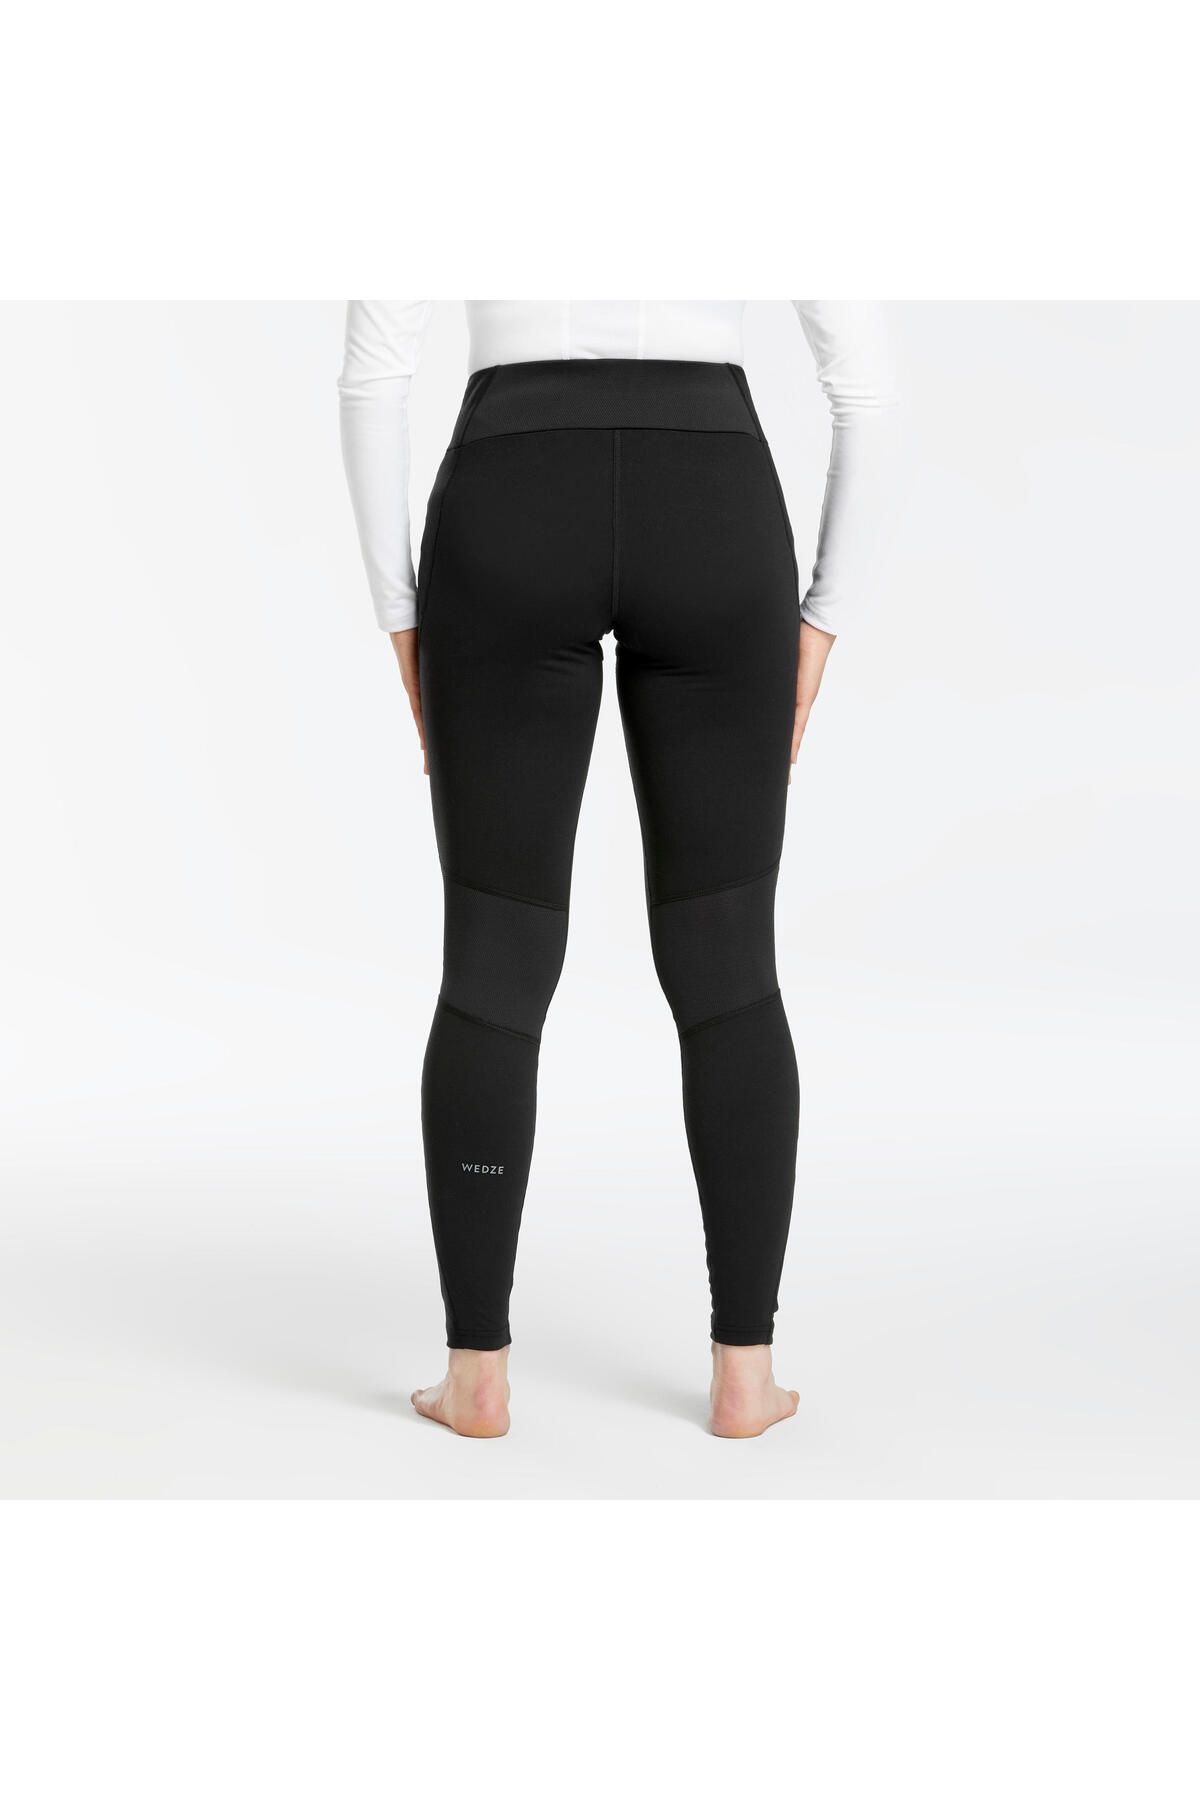 Women Thermal for Skiing - BL500 Black